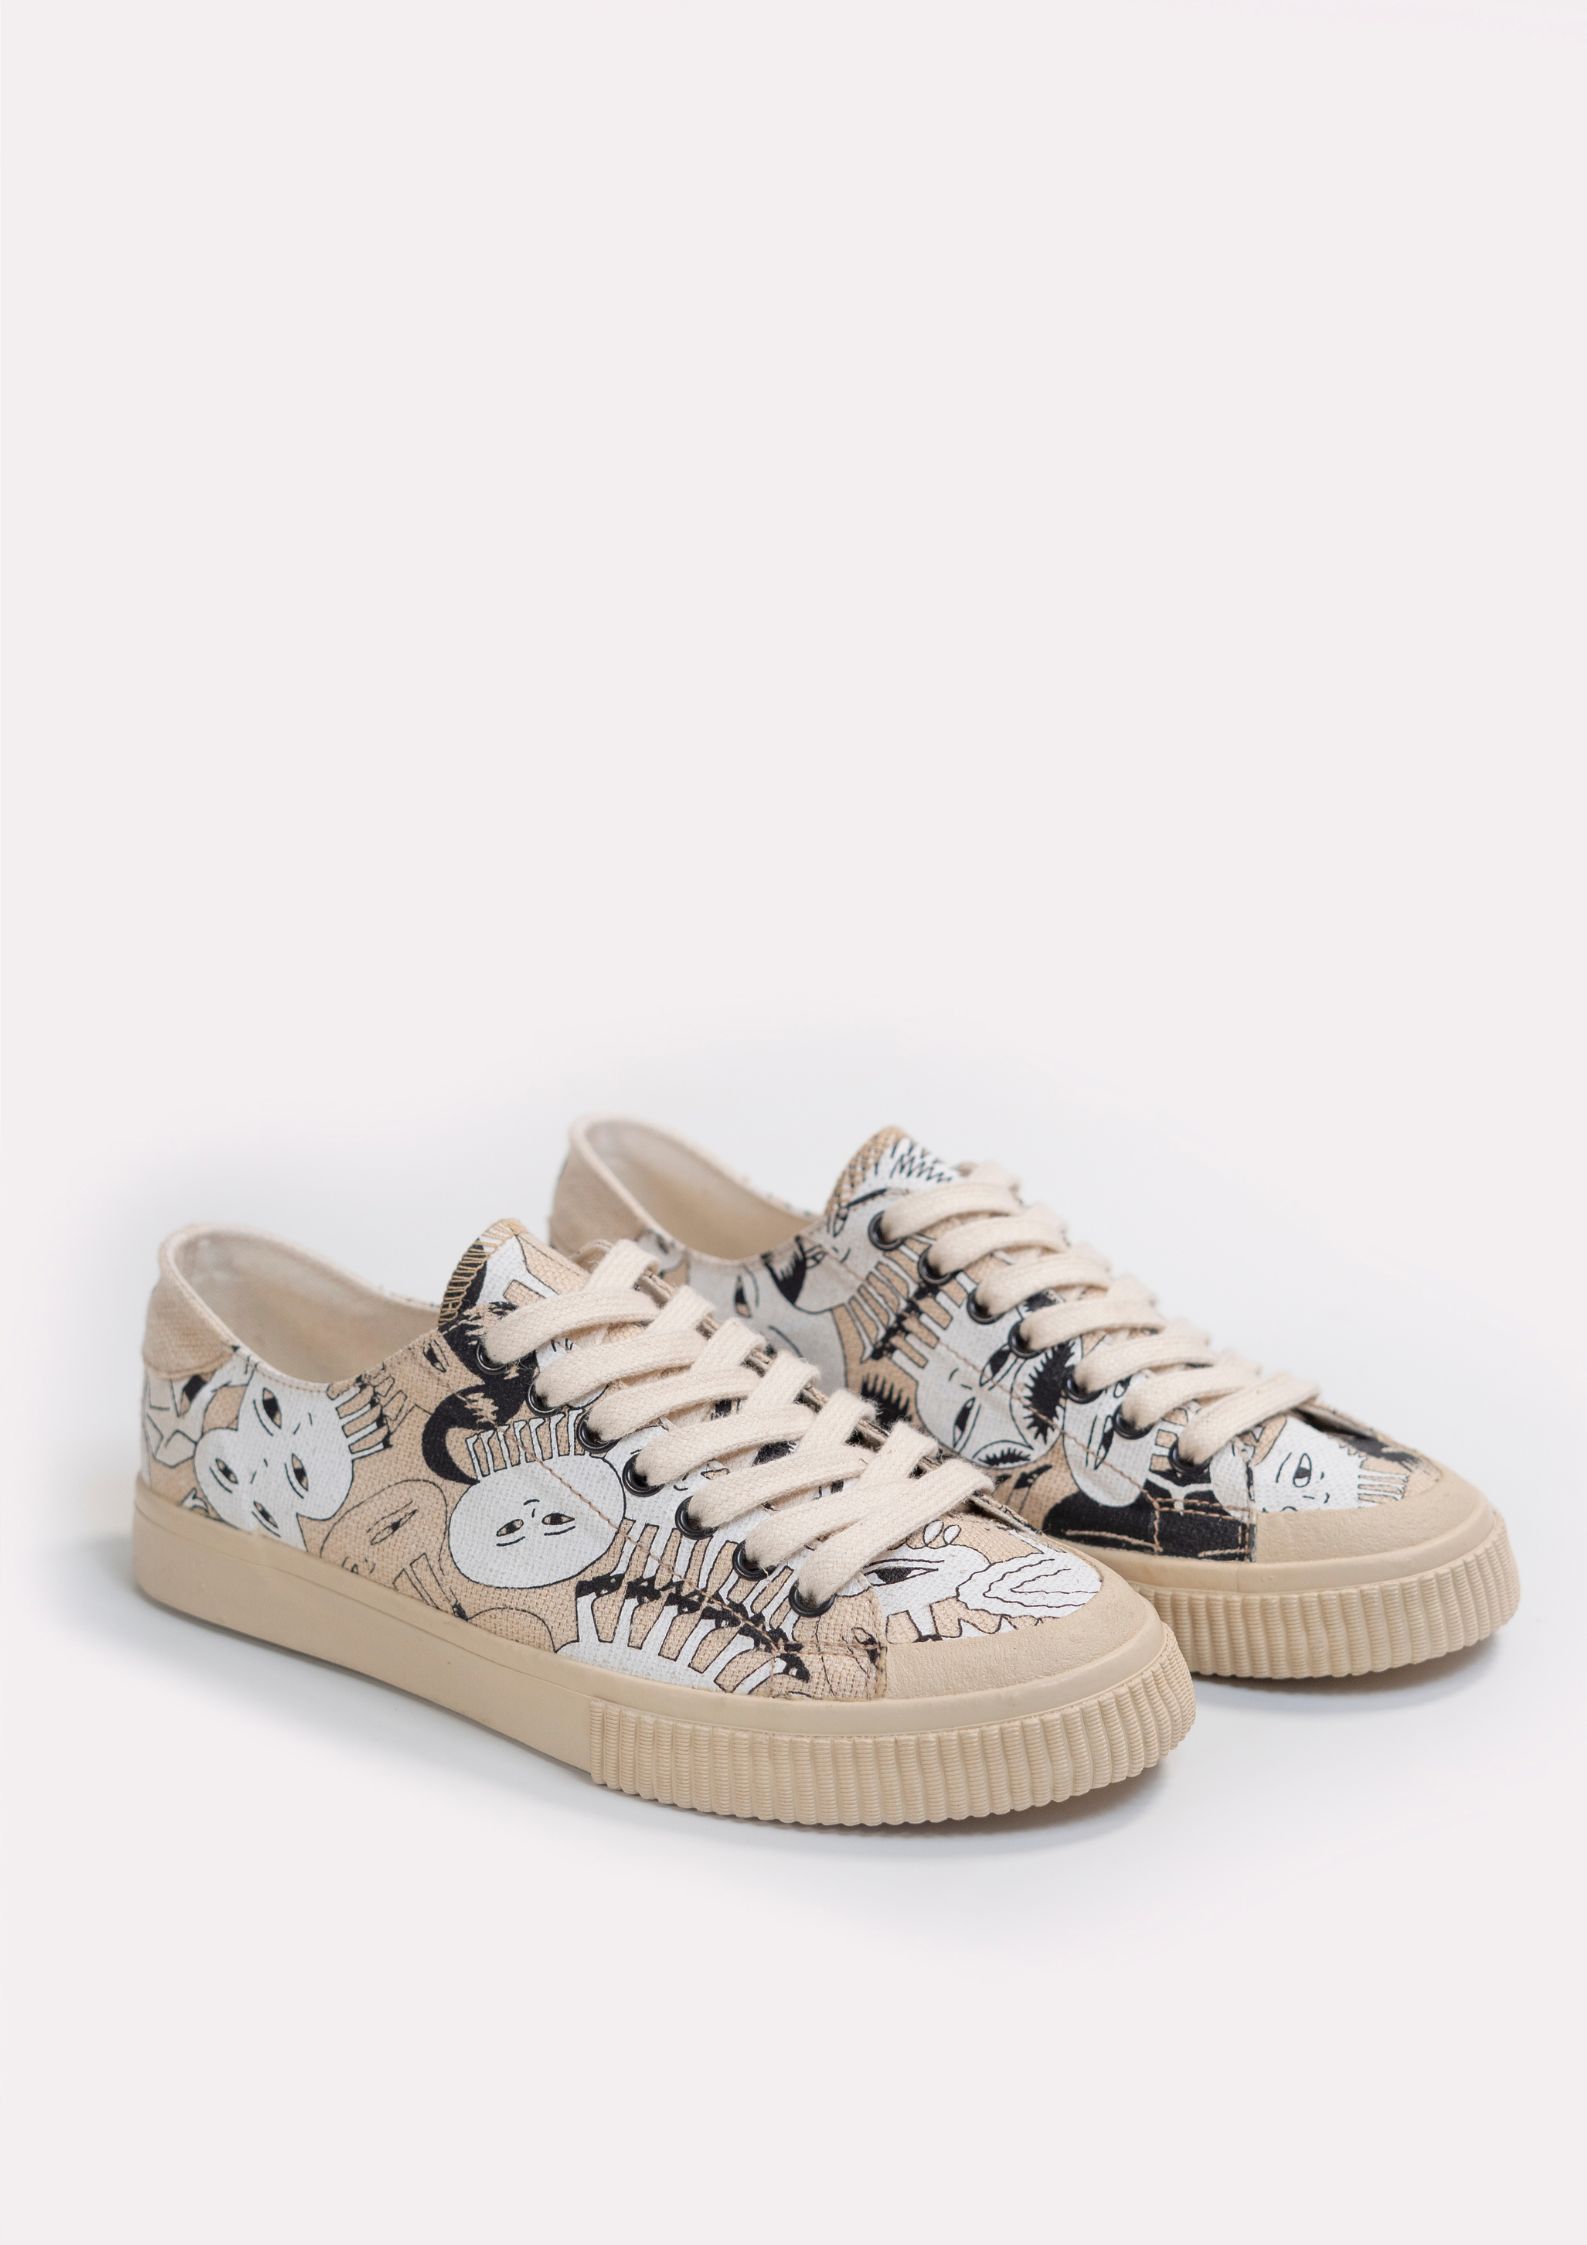 Beige LakArt sneakers with white laces by Garapata.